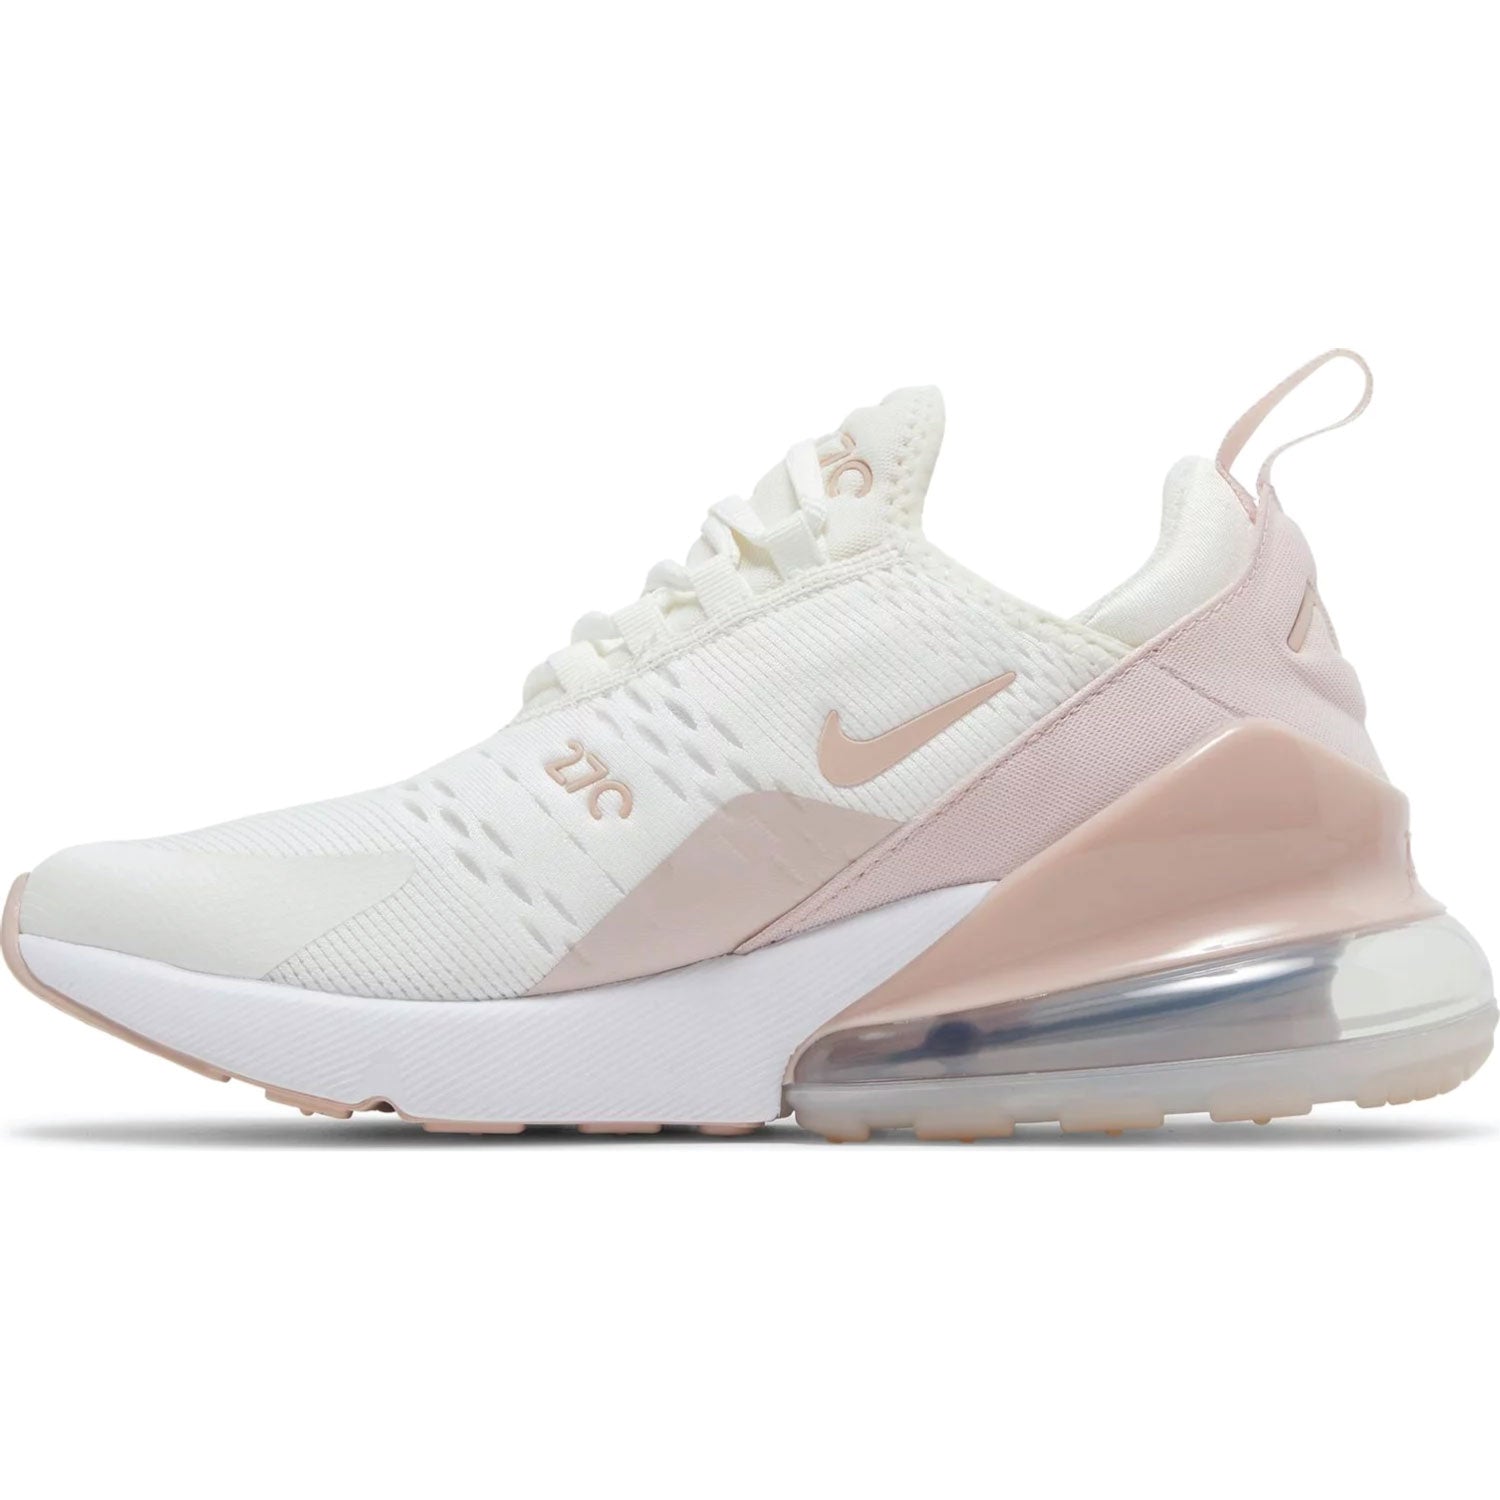 Wmns Air Max 270 Essential 'Oxford Pink' Trainers Nike 5.5 UK Oxford Pink 